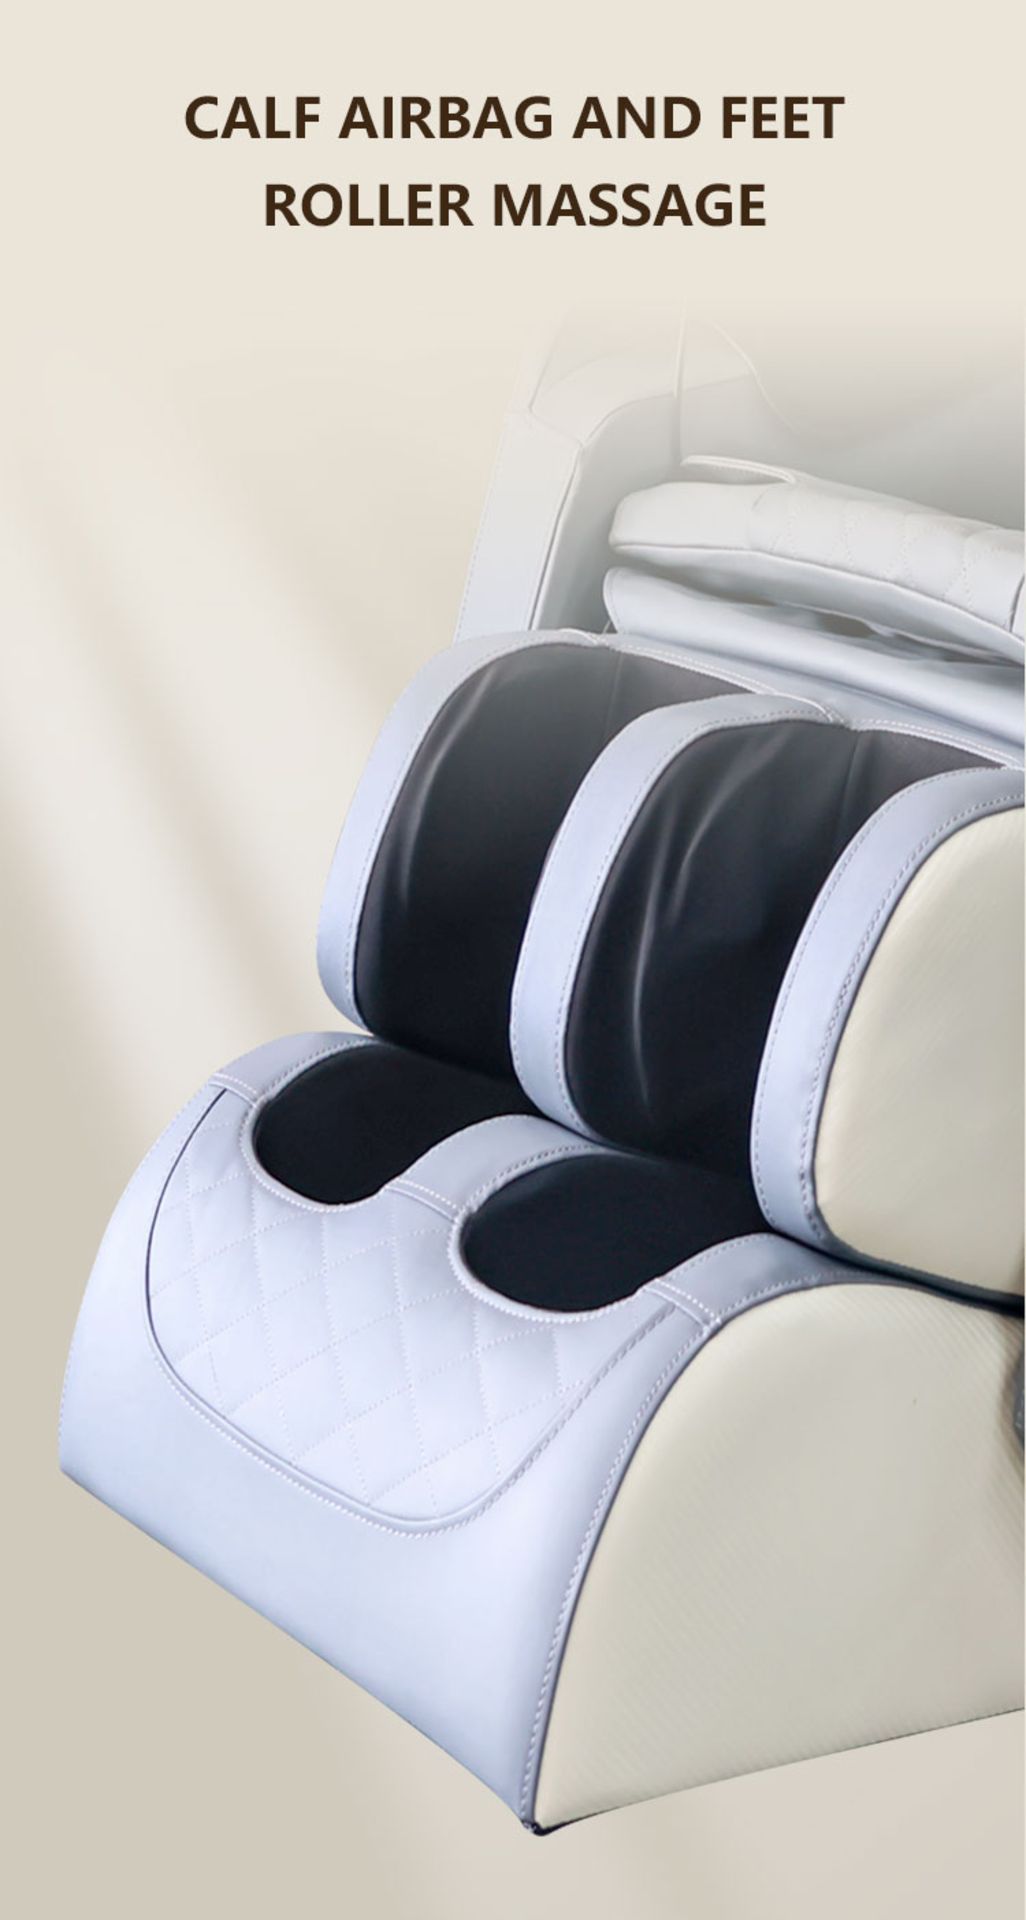 Brand New in Box Orchid Blue/Black MiComfort Full Body Massage Chair RRP £2199 *NO VAT* - Image 10 of 14